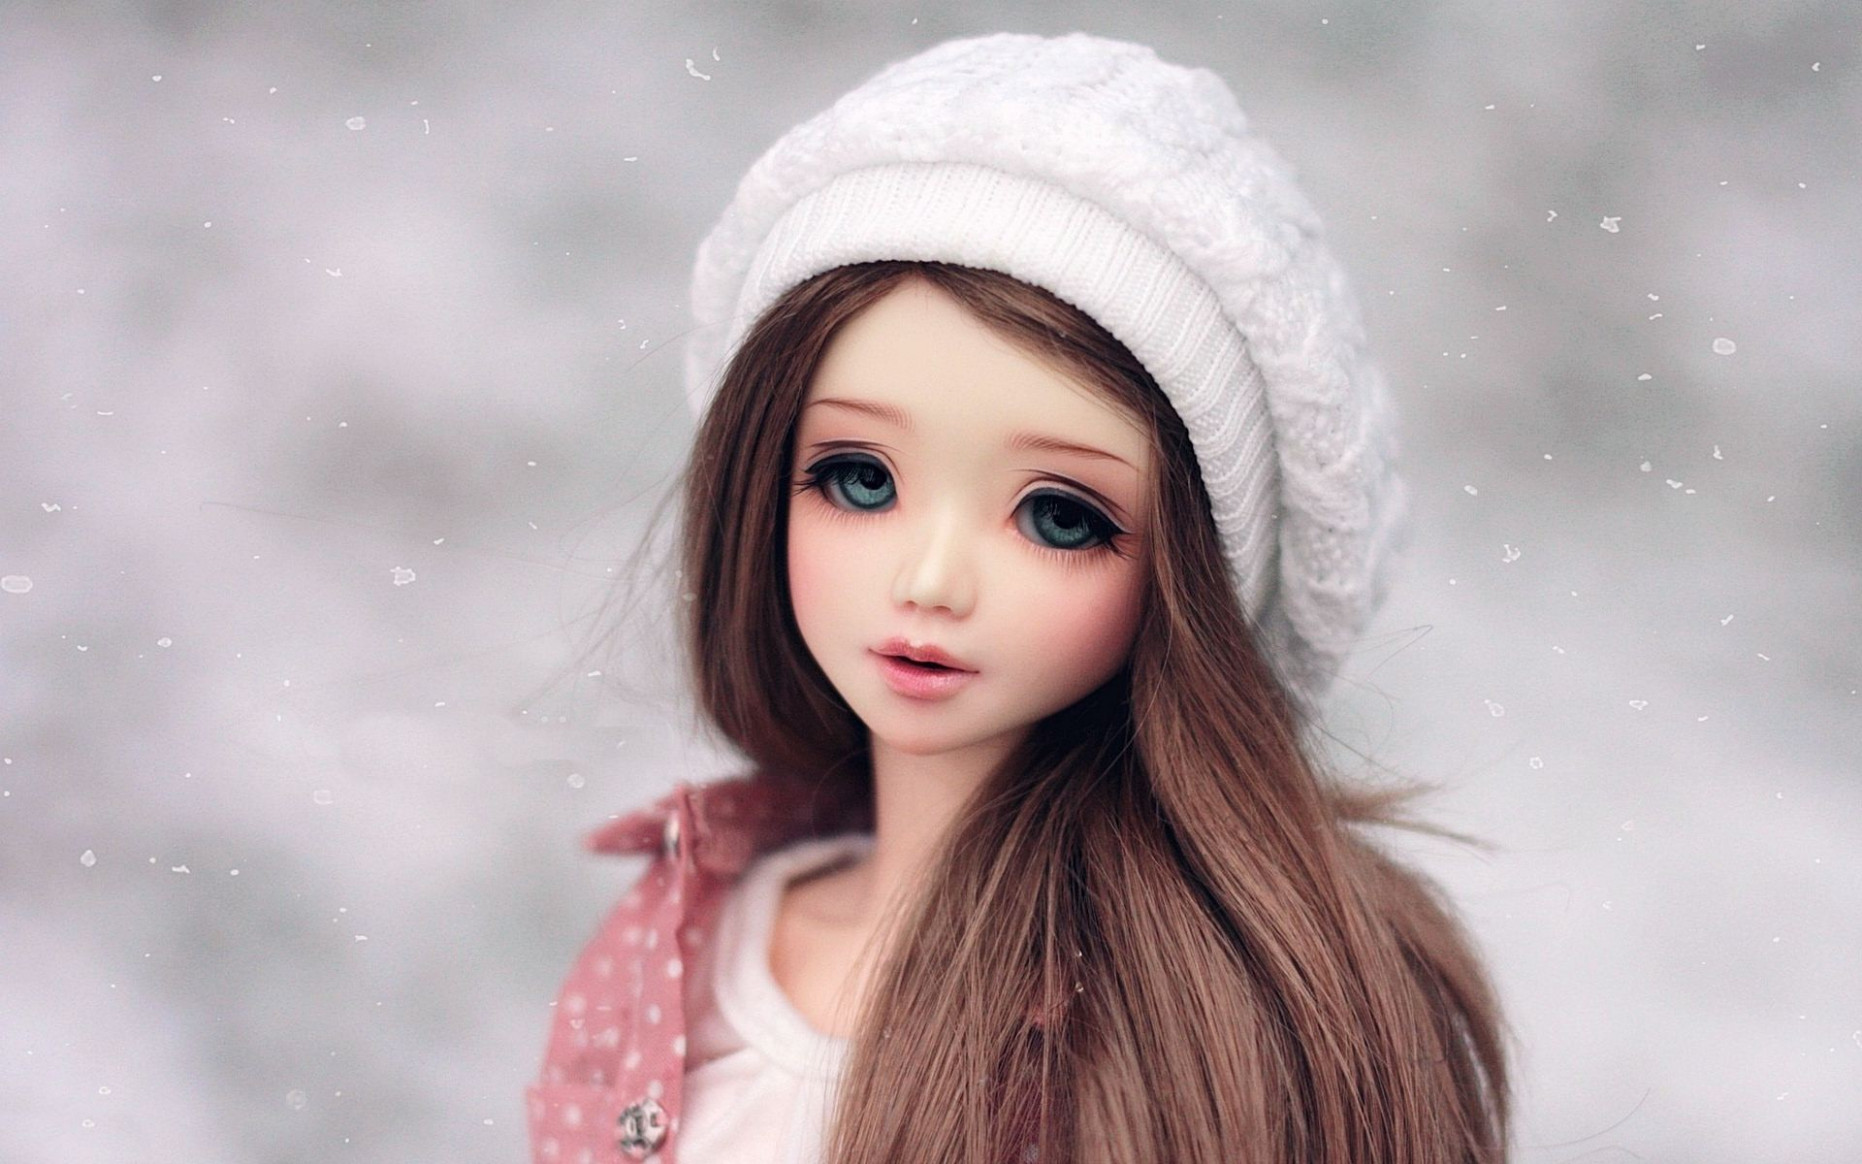 Stylish Cute Dolls Wallpaper For Image